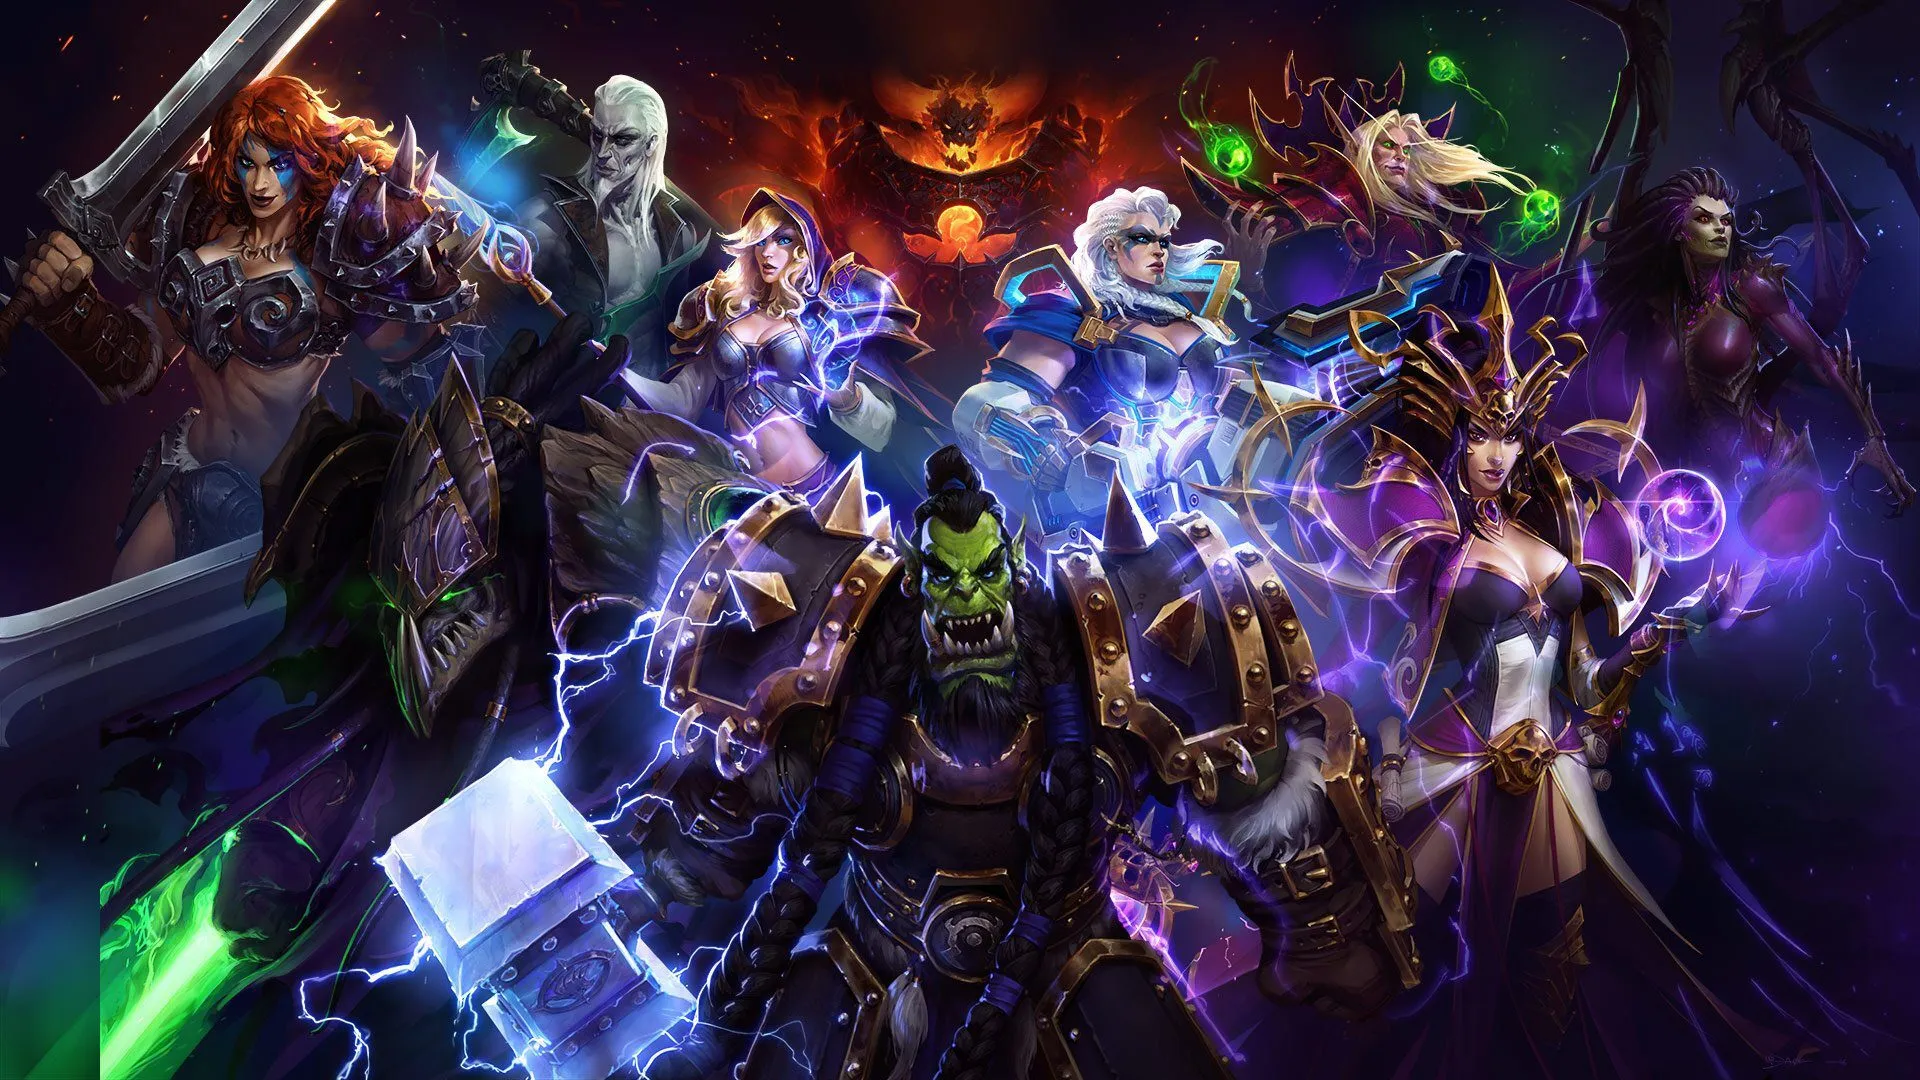 Heroes of the Storm is still alive and well, here's some 2022